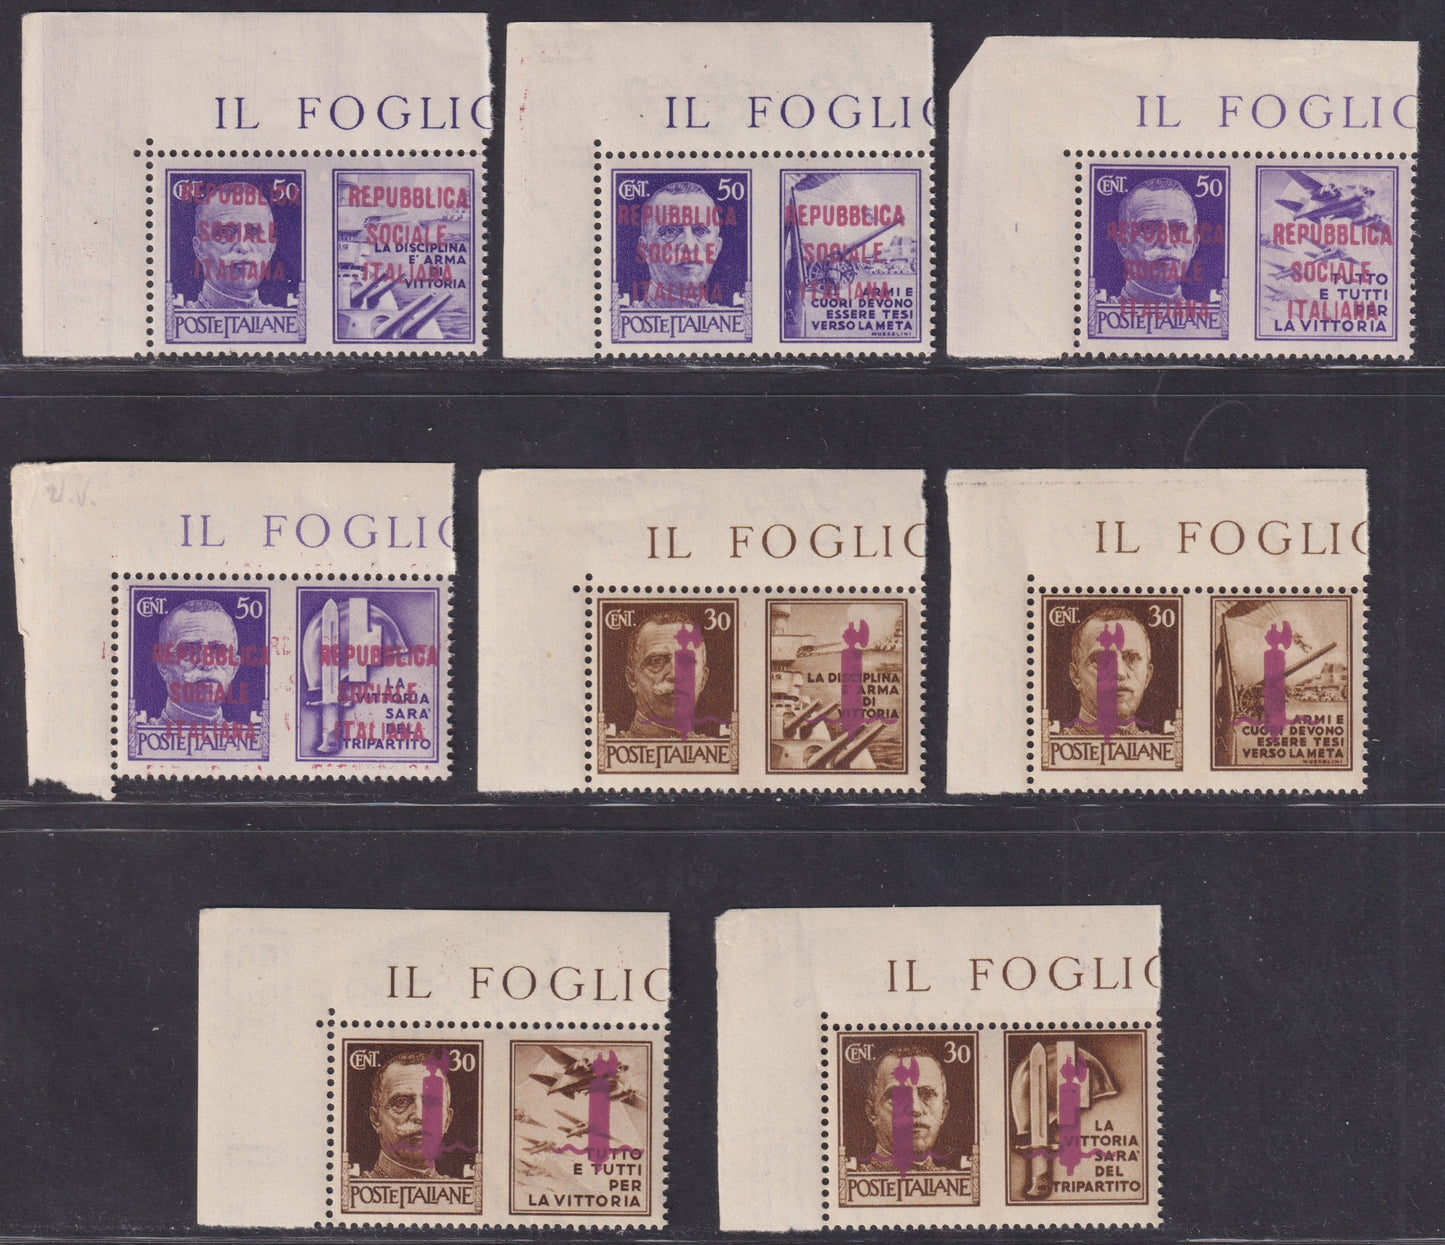 RSI407 - 1944 - War propaganda, series of 8 copies with lilac overprint on two sections of Florence, new with intact gum. (41/I-48/I). All signed Chiavarello.